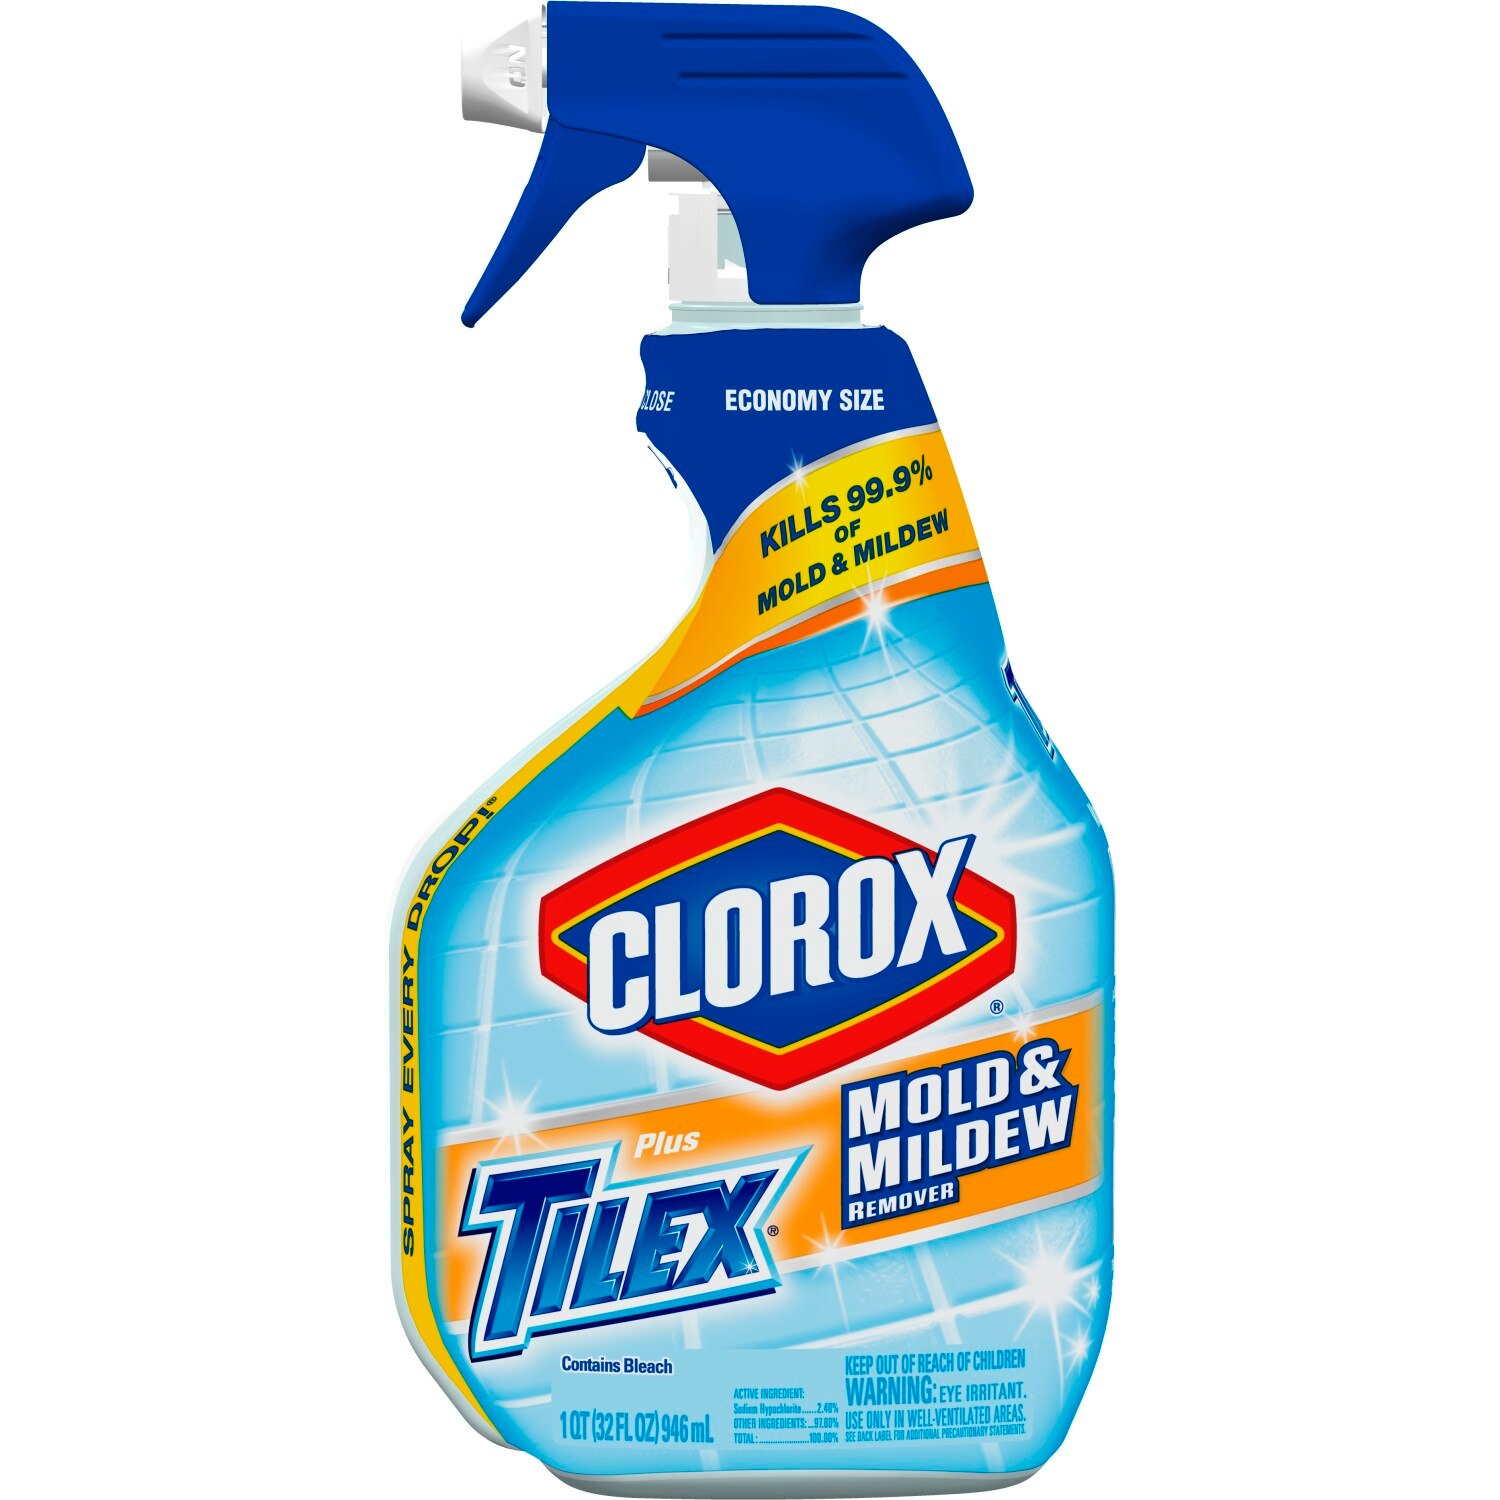 Tilex Mold & Mildew Remover with Bleach